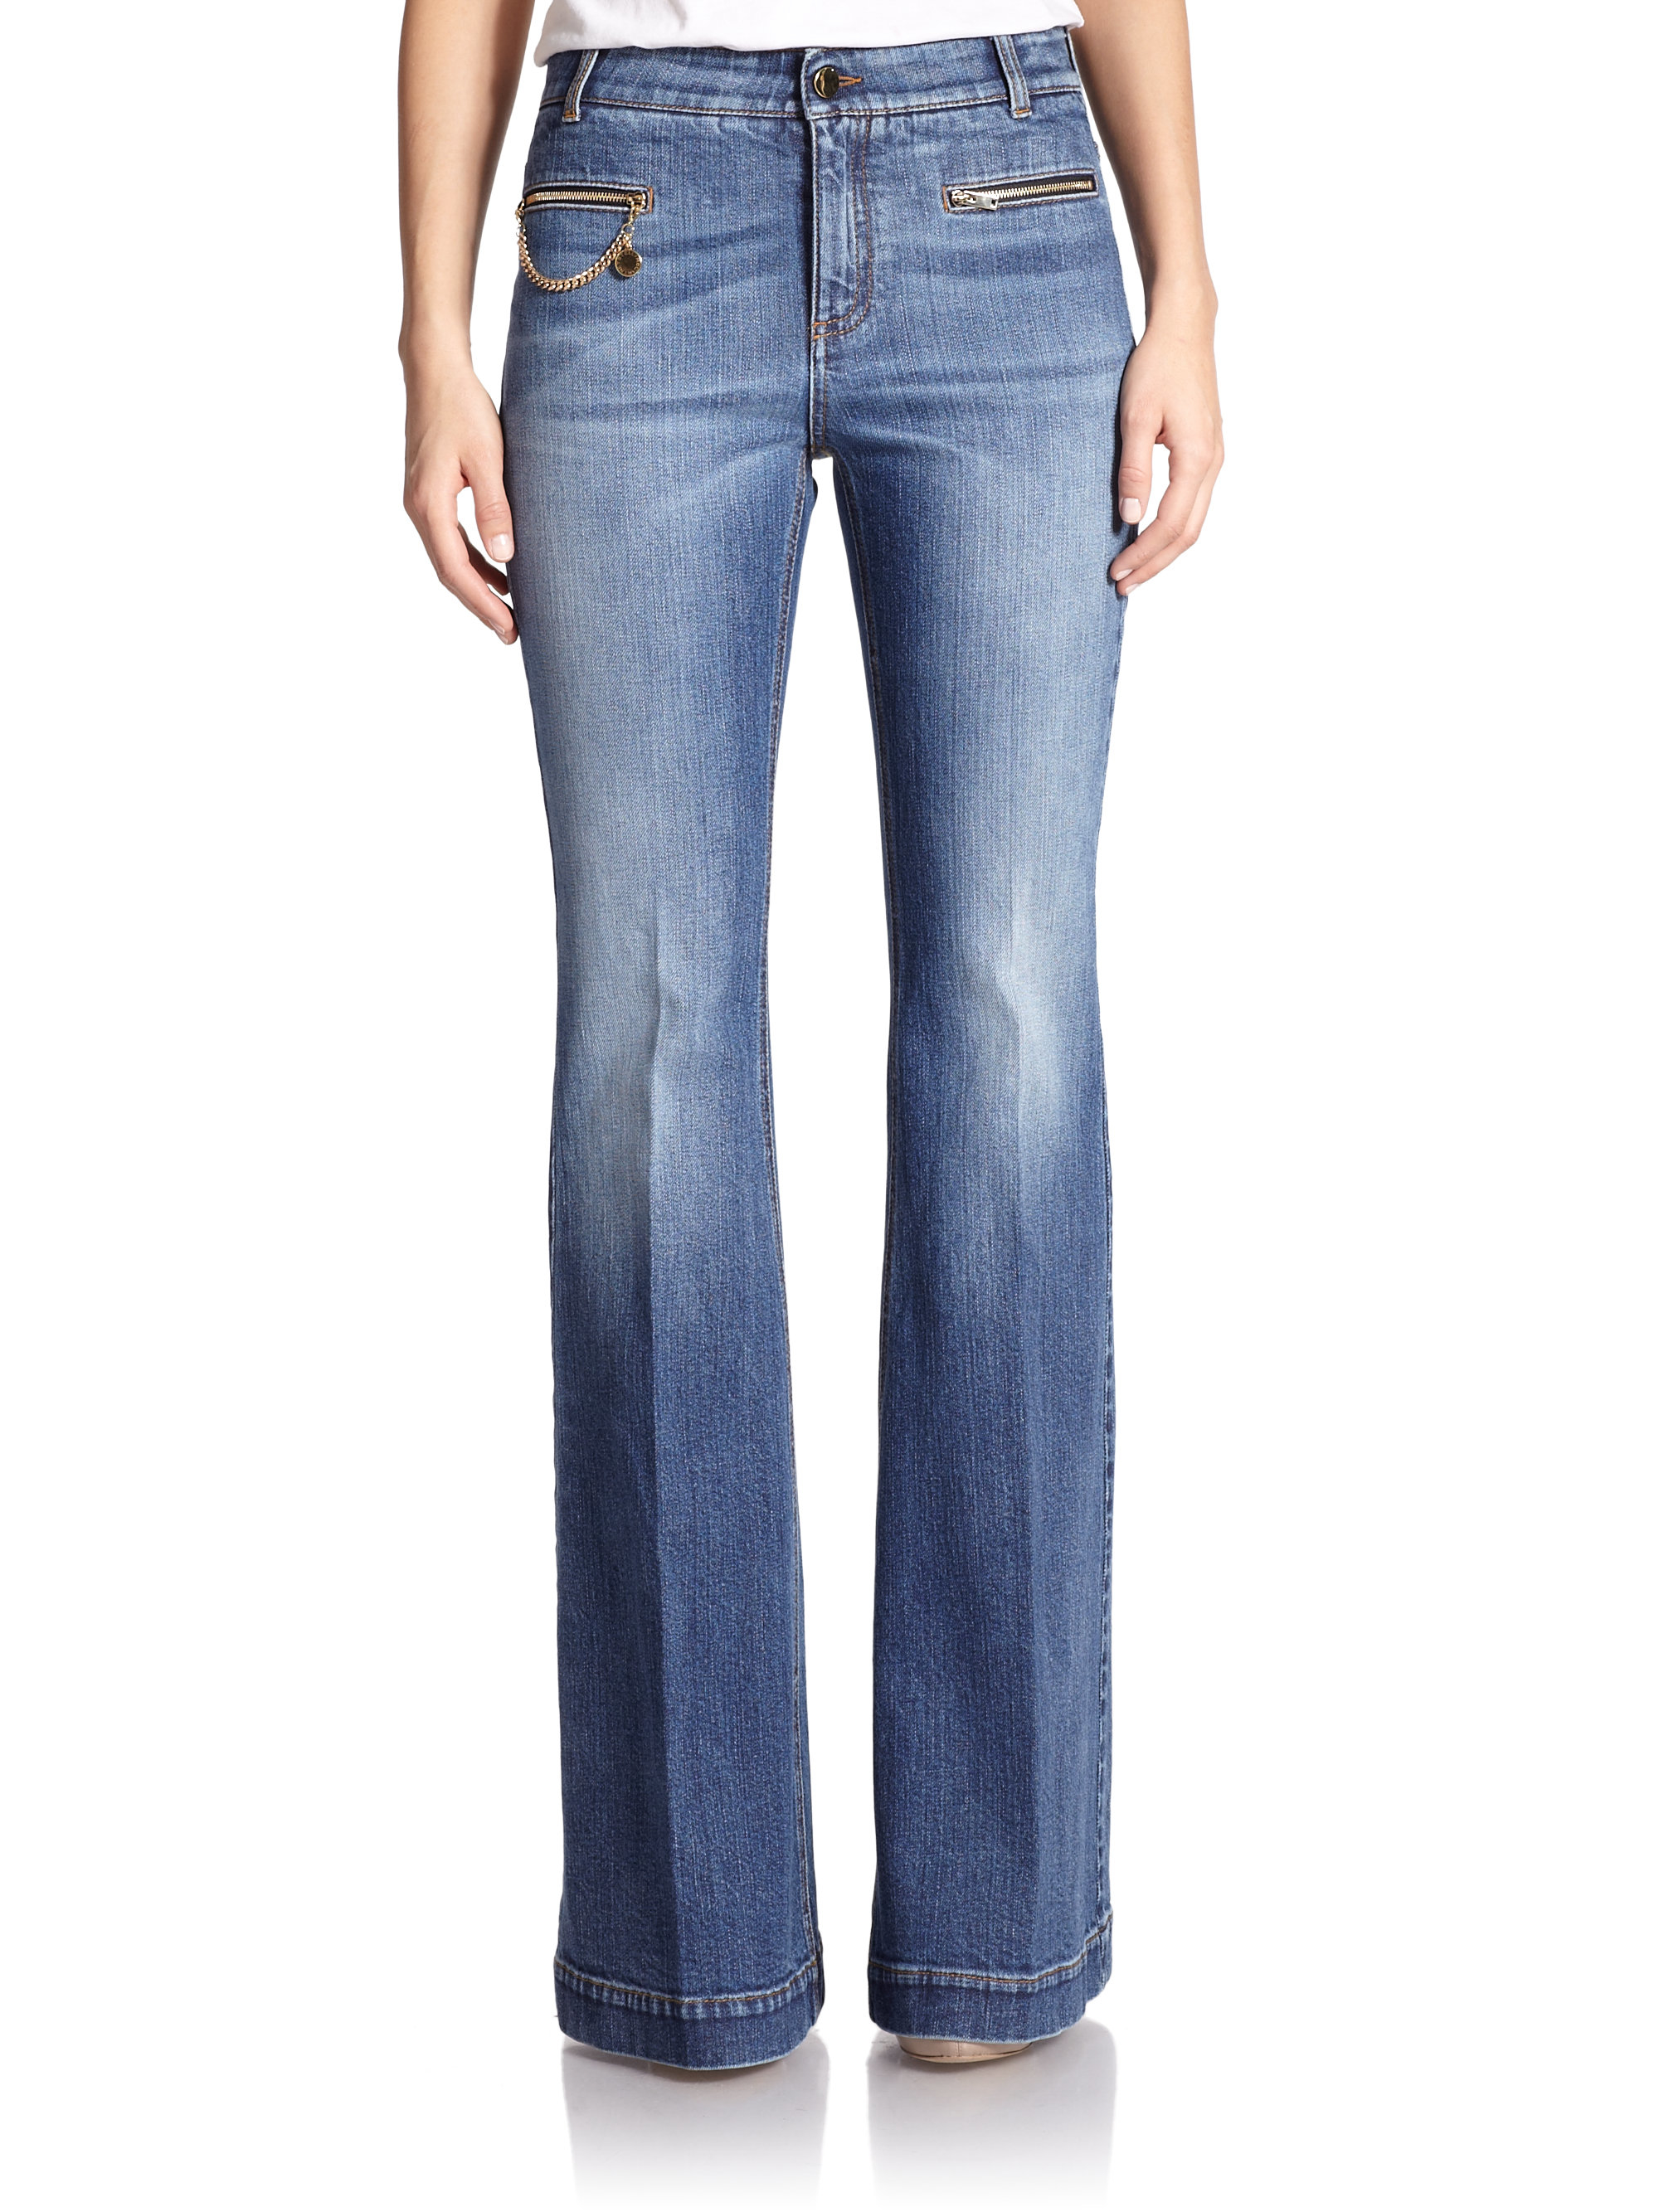 Stella mccartney The 70s Flared Jeans in Blue | Lyst